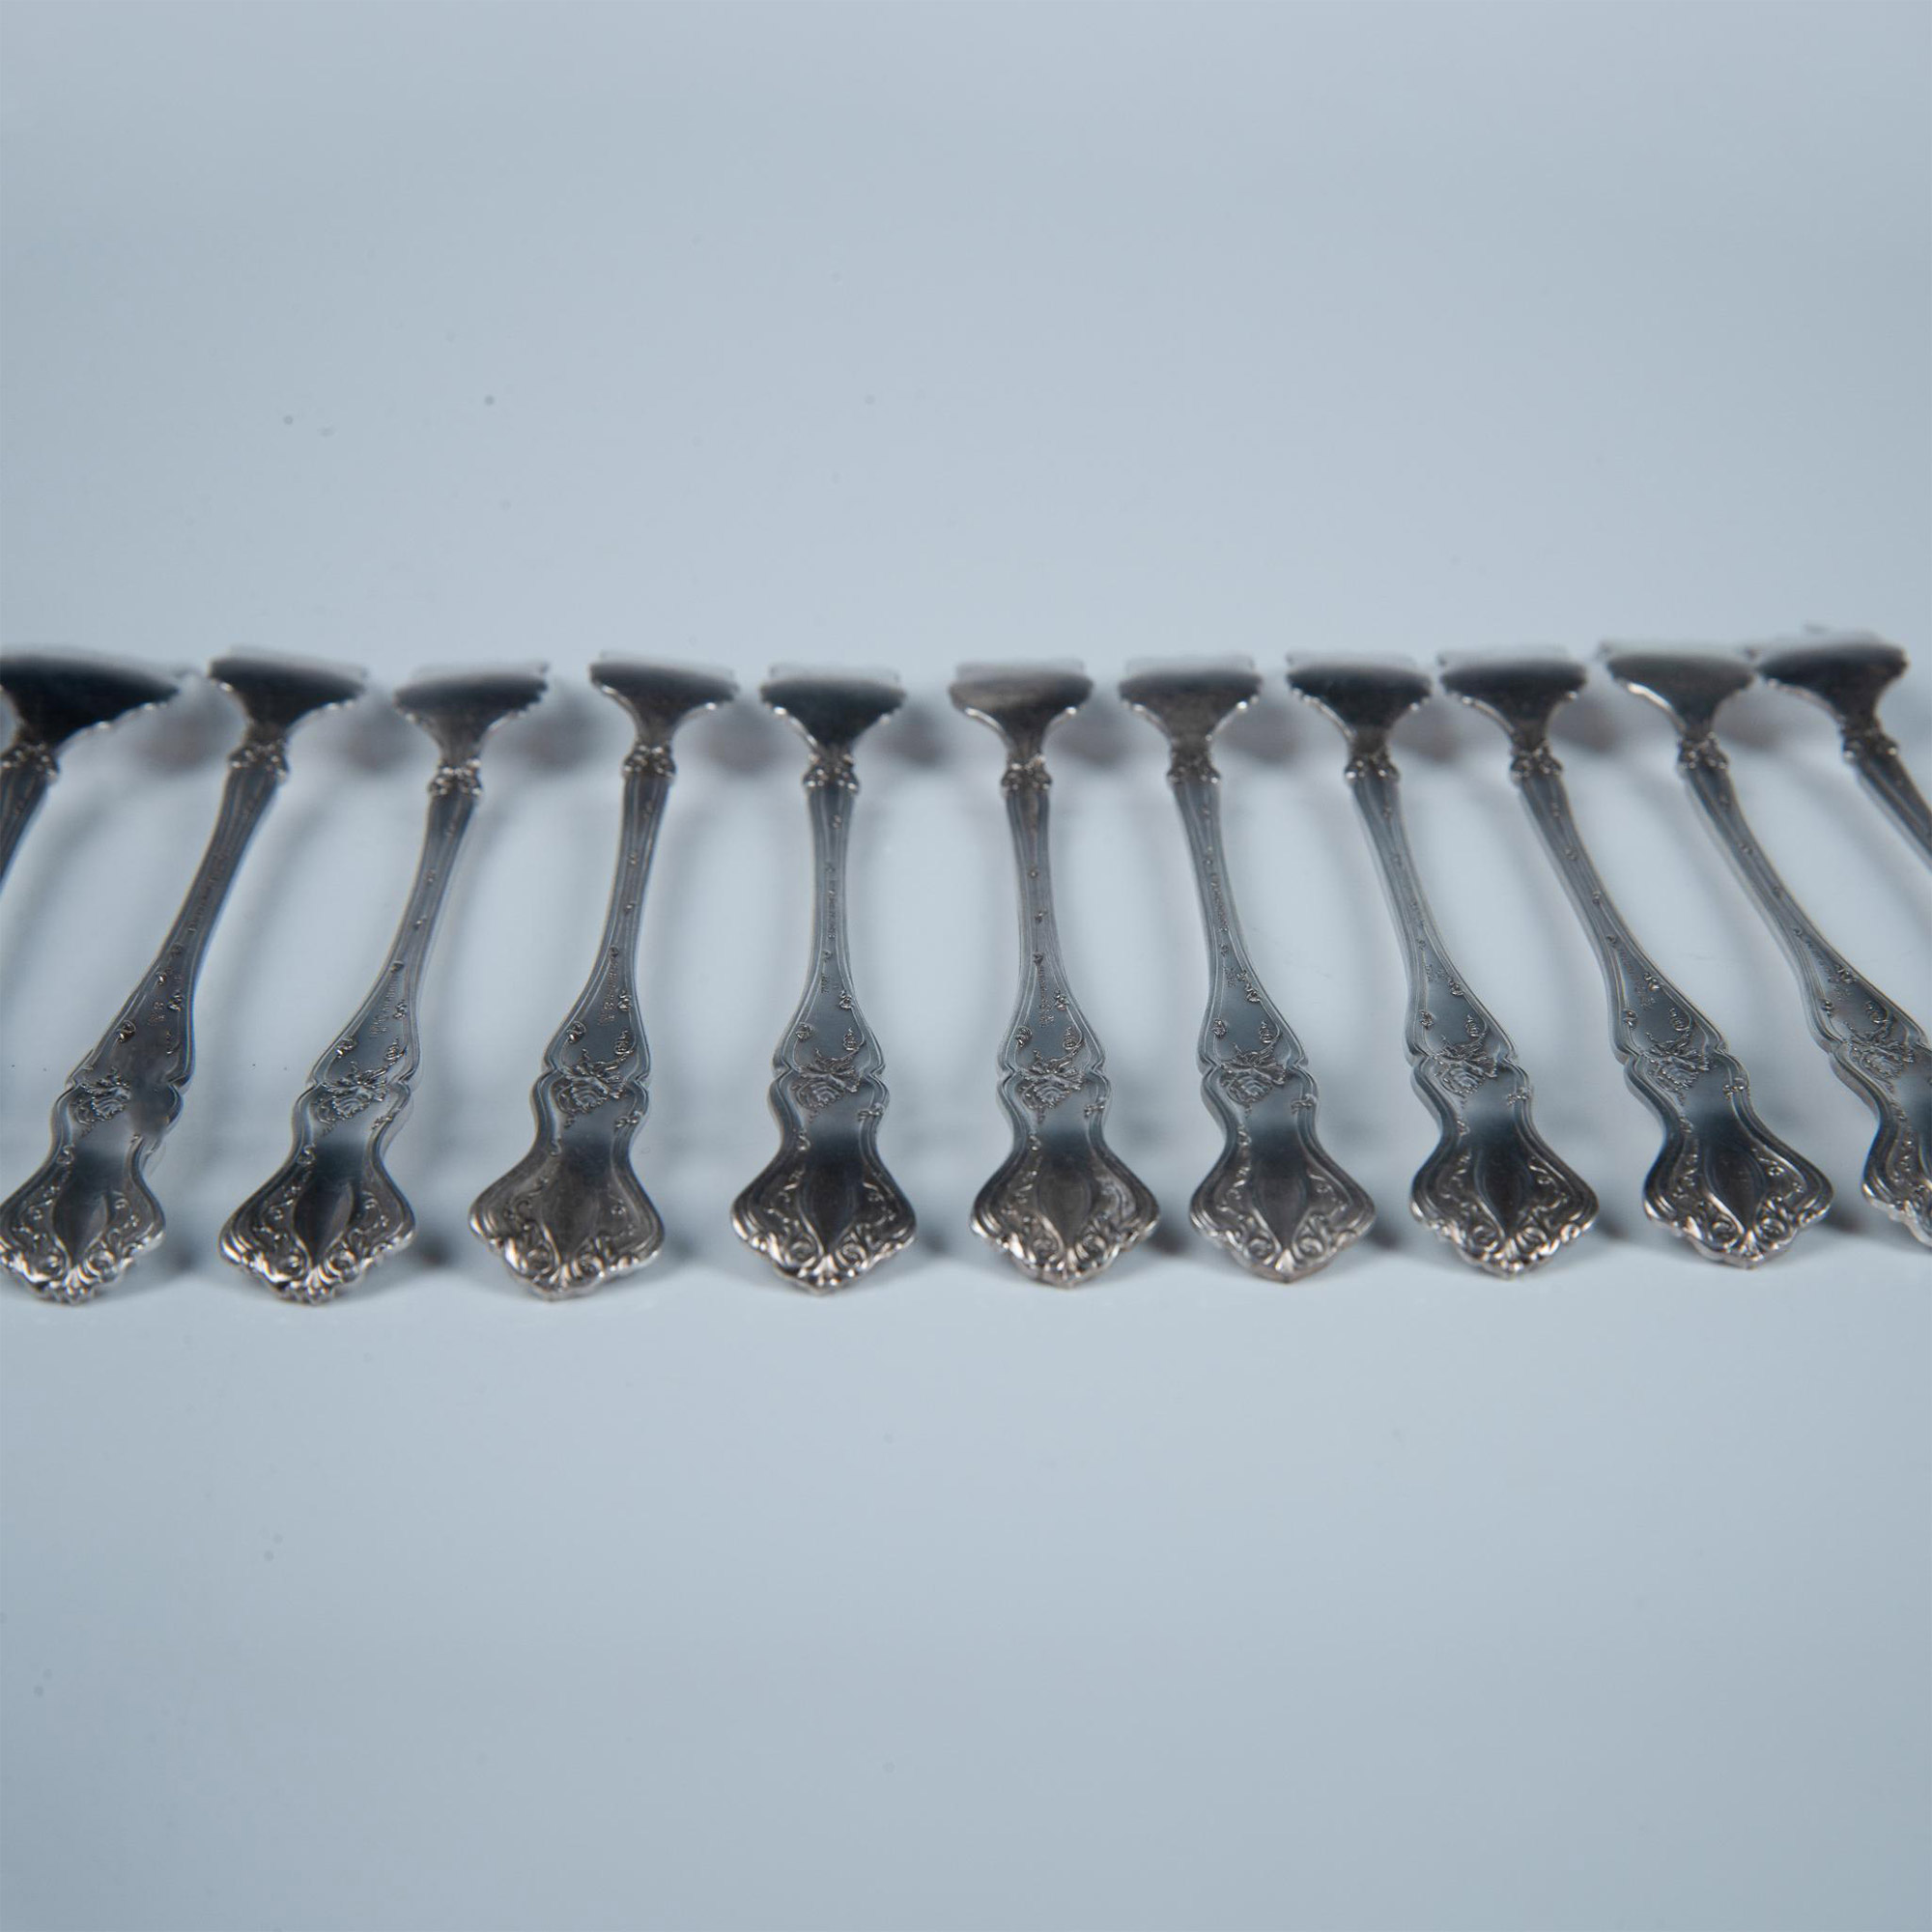 11pc Rogers Bros. 1847 Silverplate Oyster Forks, Vintage - Image 3 of 5